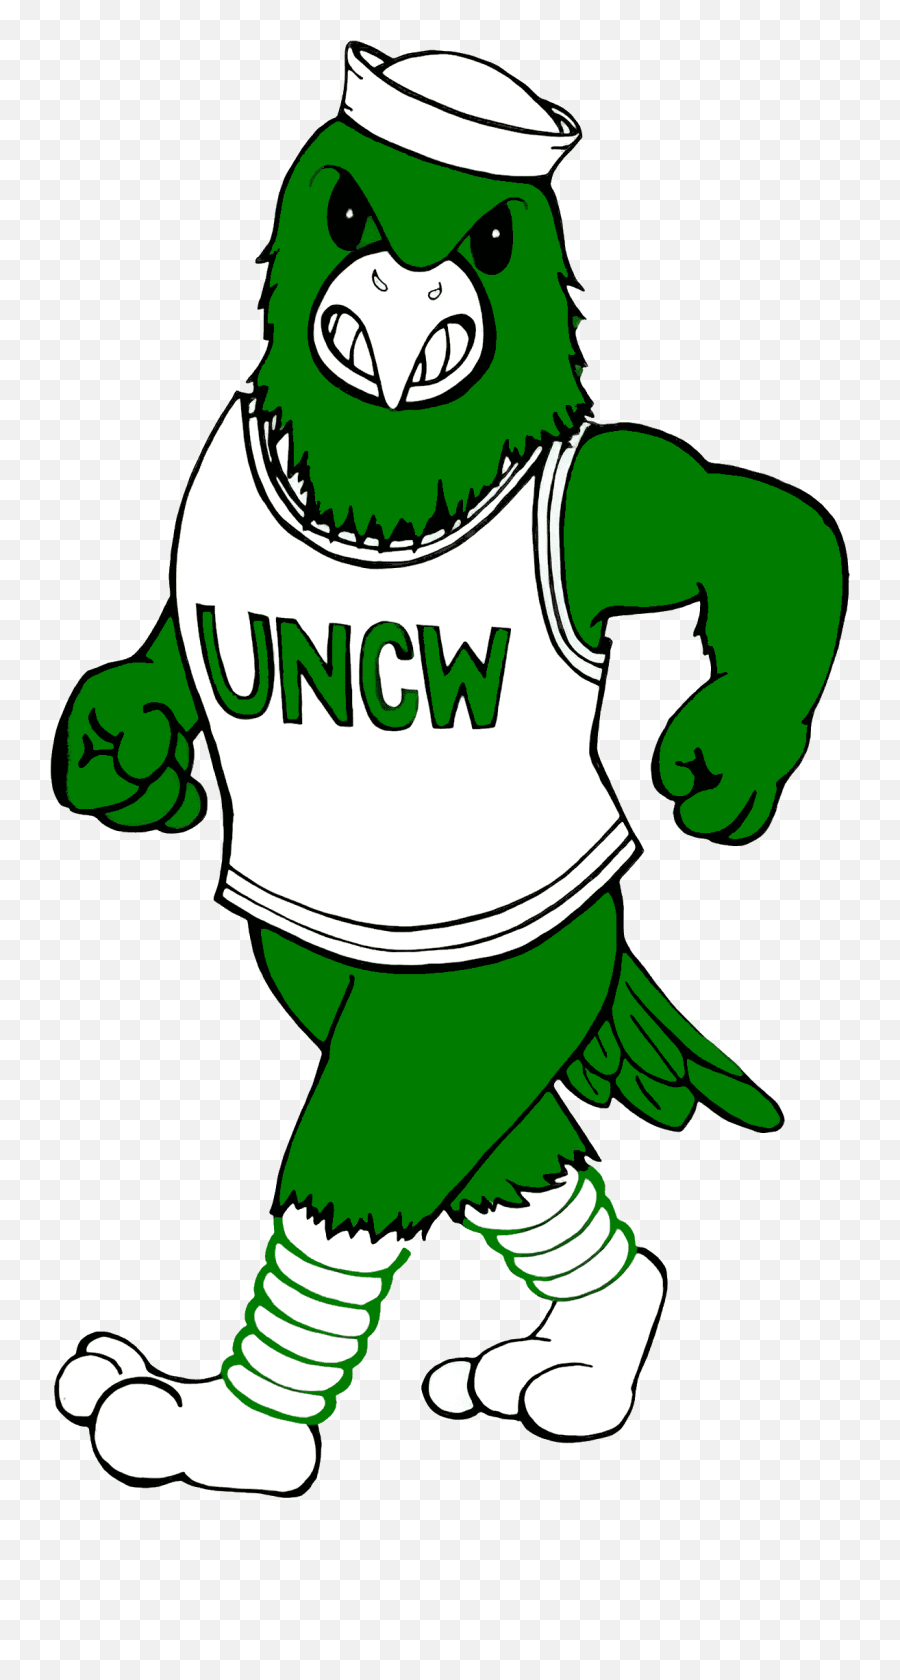 Nc - Wilmington Seahawks Logo The Most Famous Brands And Old Uncw Logo Emoji,Uncw Logo